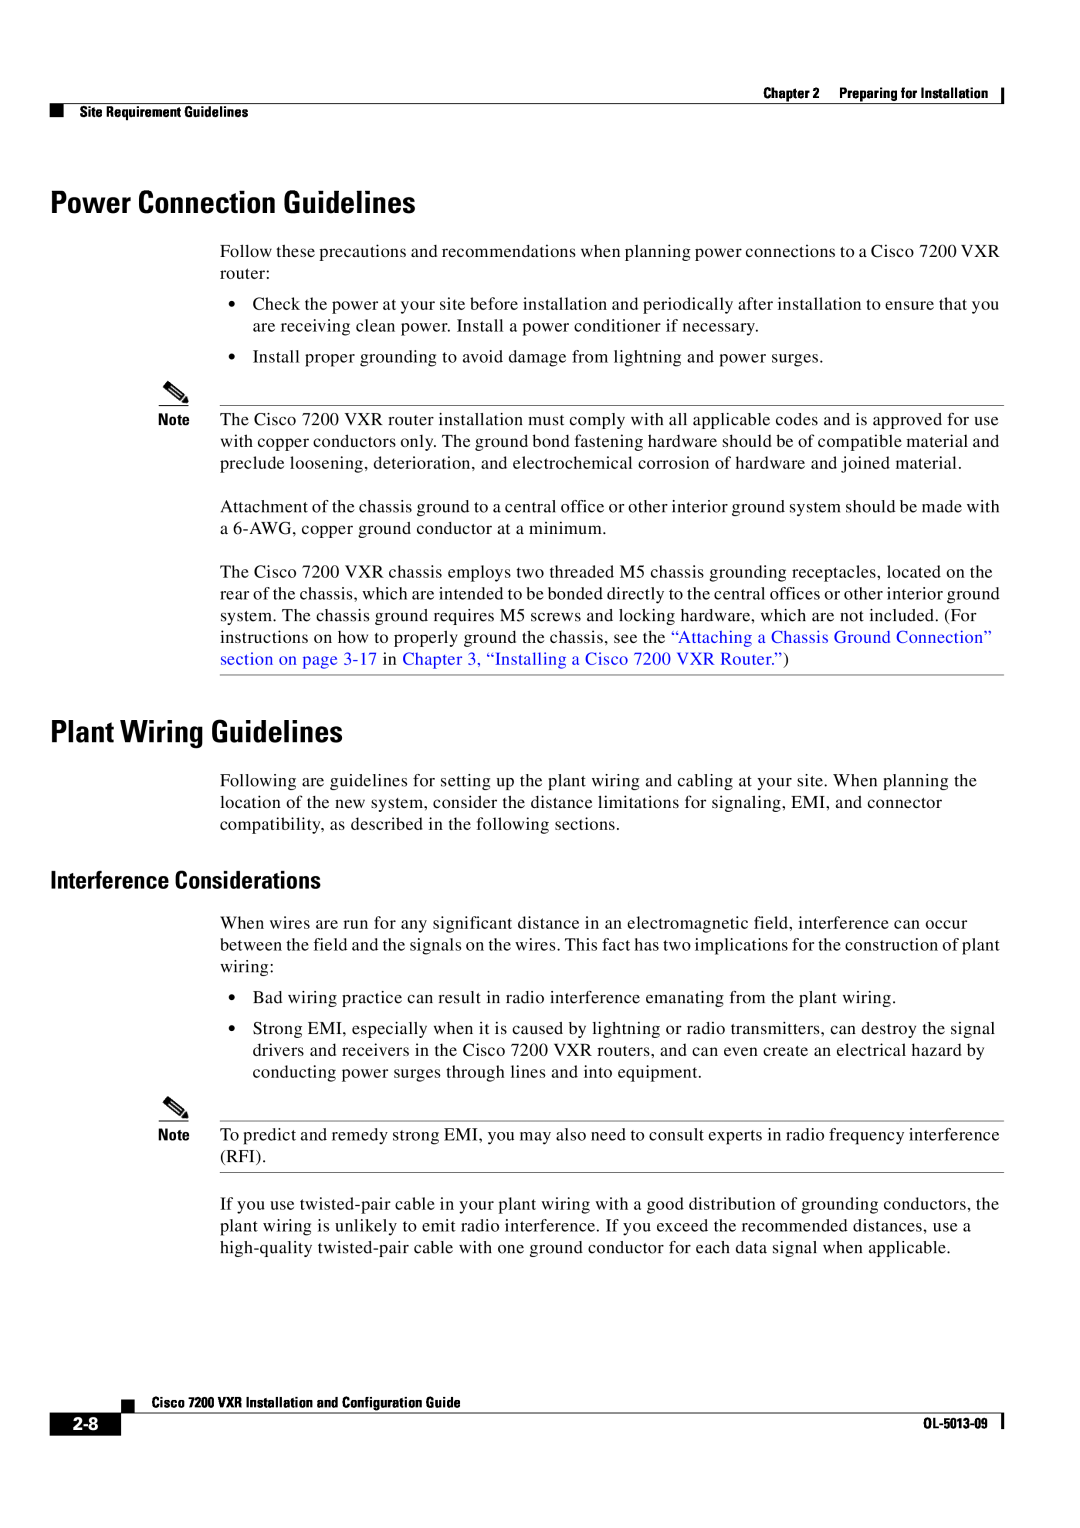 Cisco Systems 7200 VXR manual Power Connection Guidelines, Plant Wiring Guidelines, Interference Considerations 